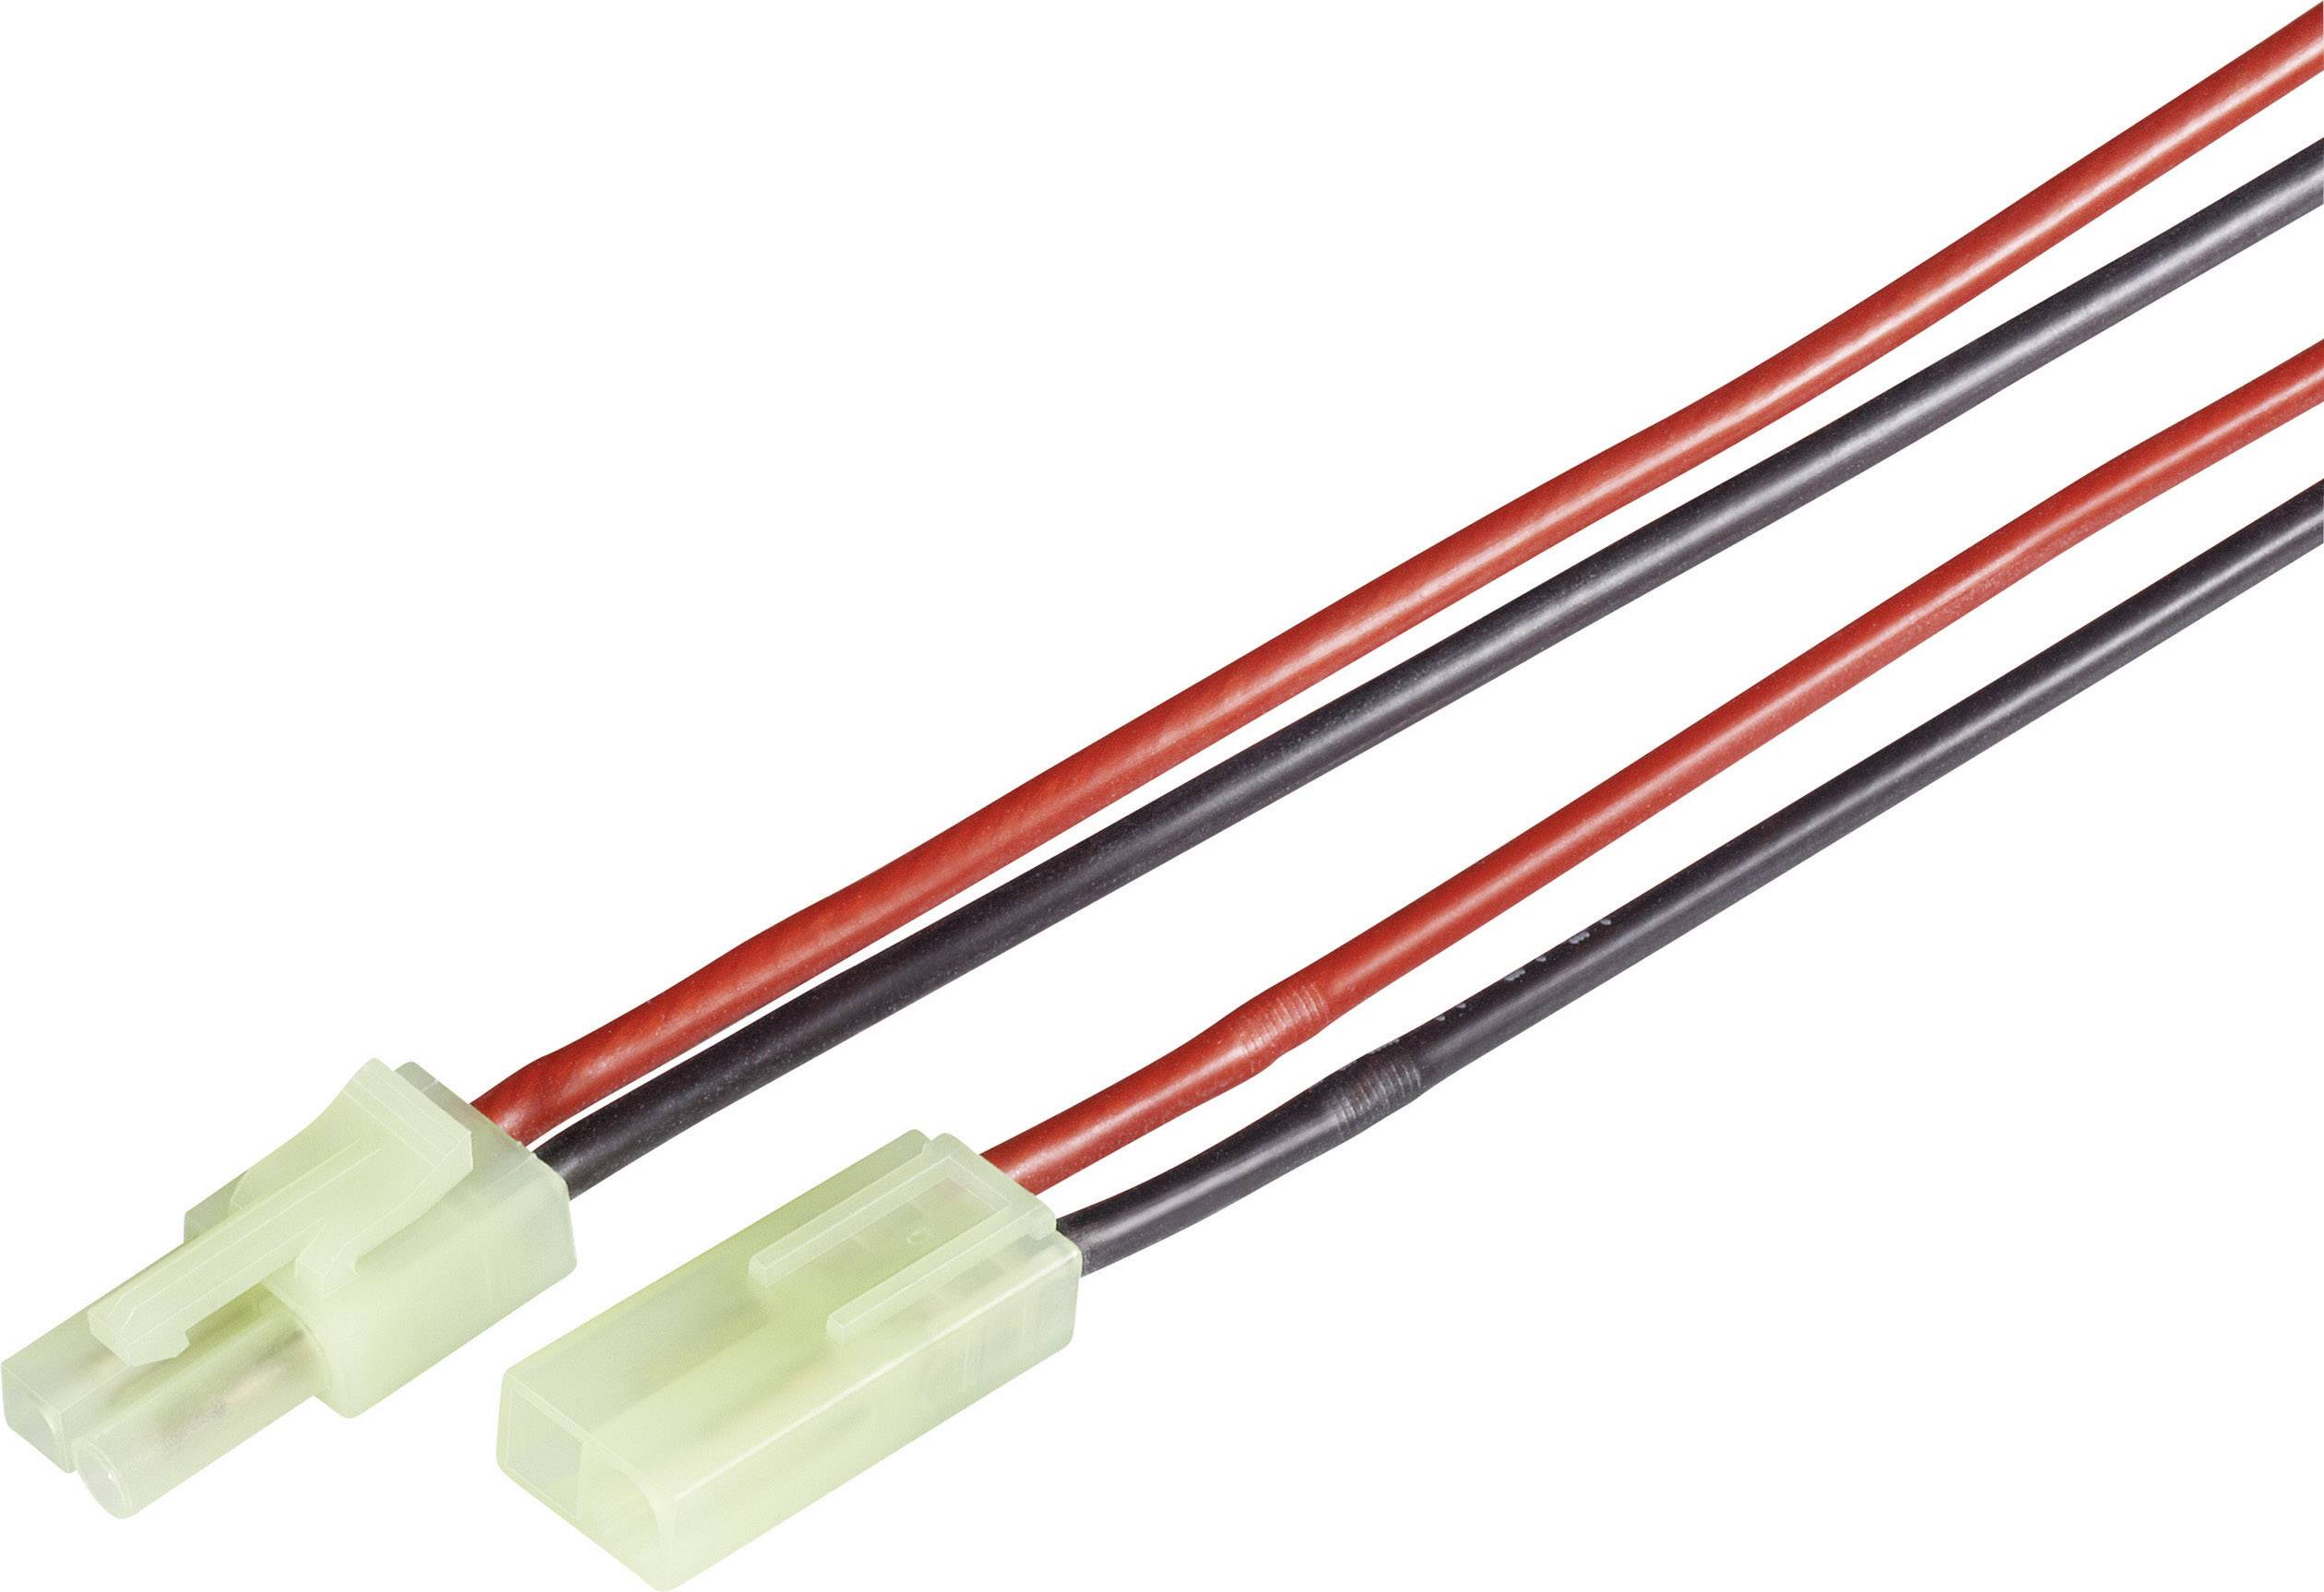 Battery cable. Pvc7012modelcraft.